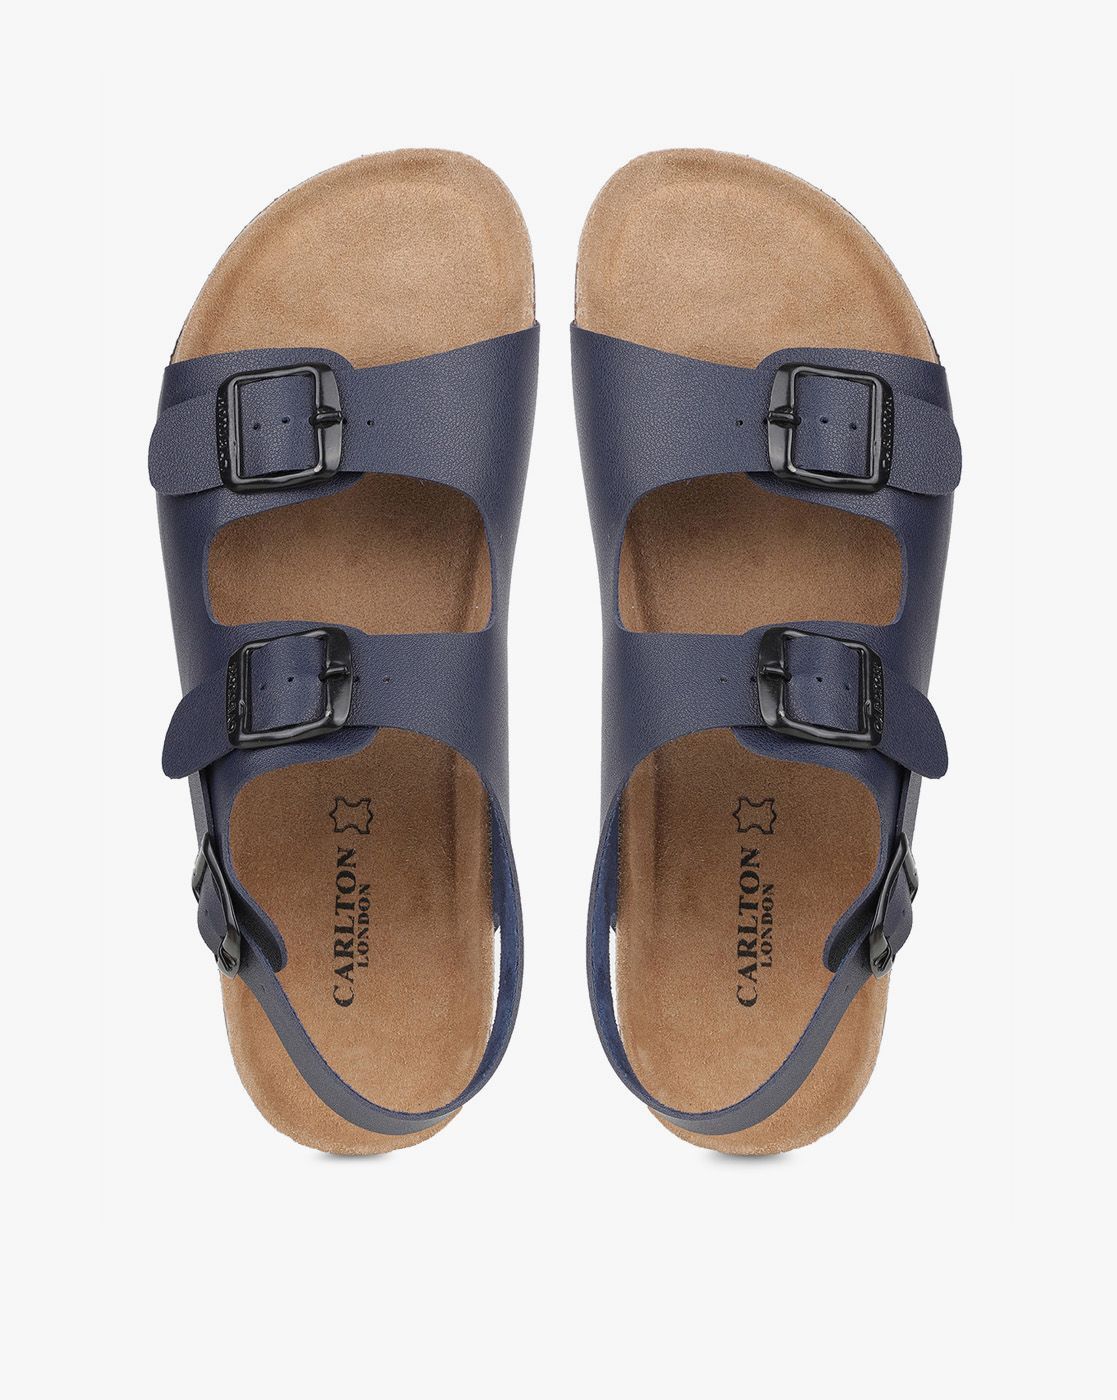 Experience more than 166 carlton london sandals latest